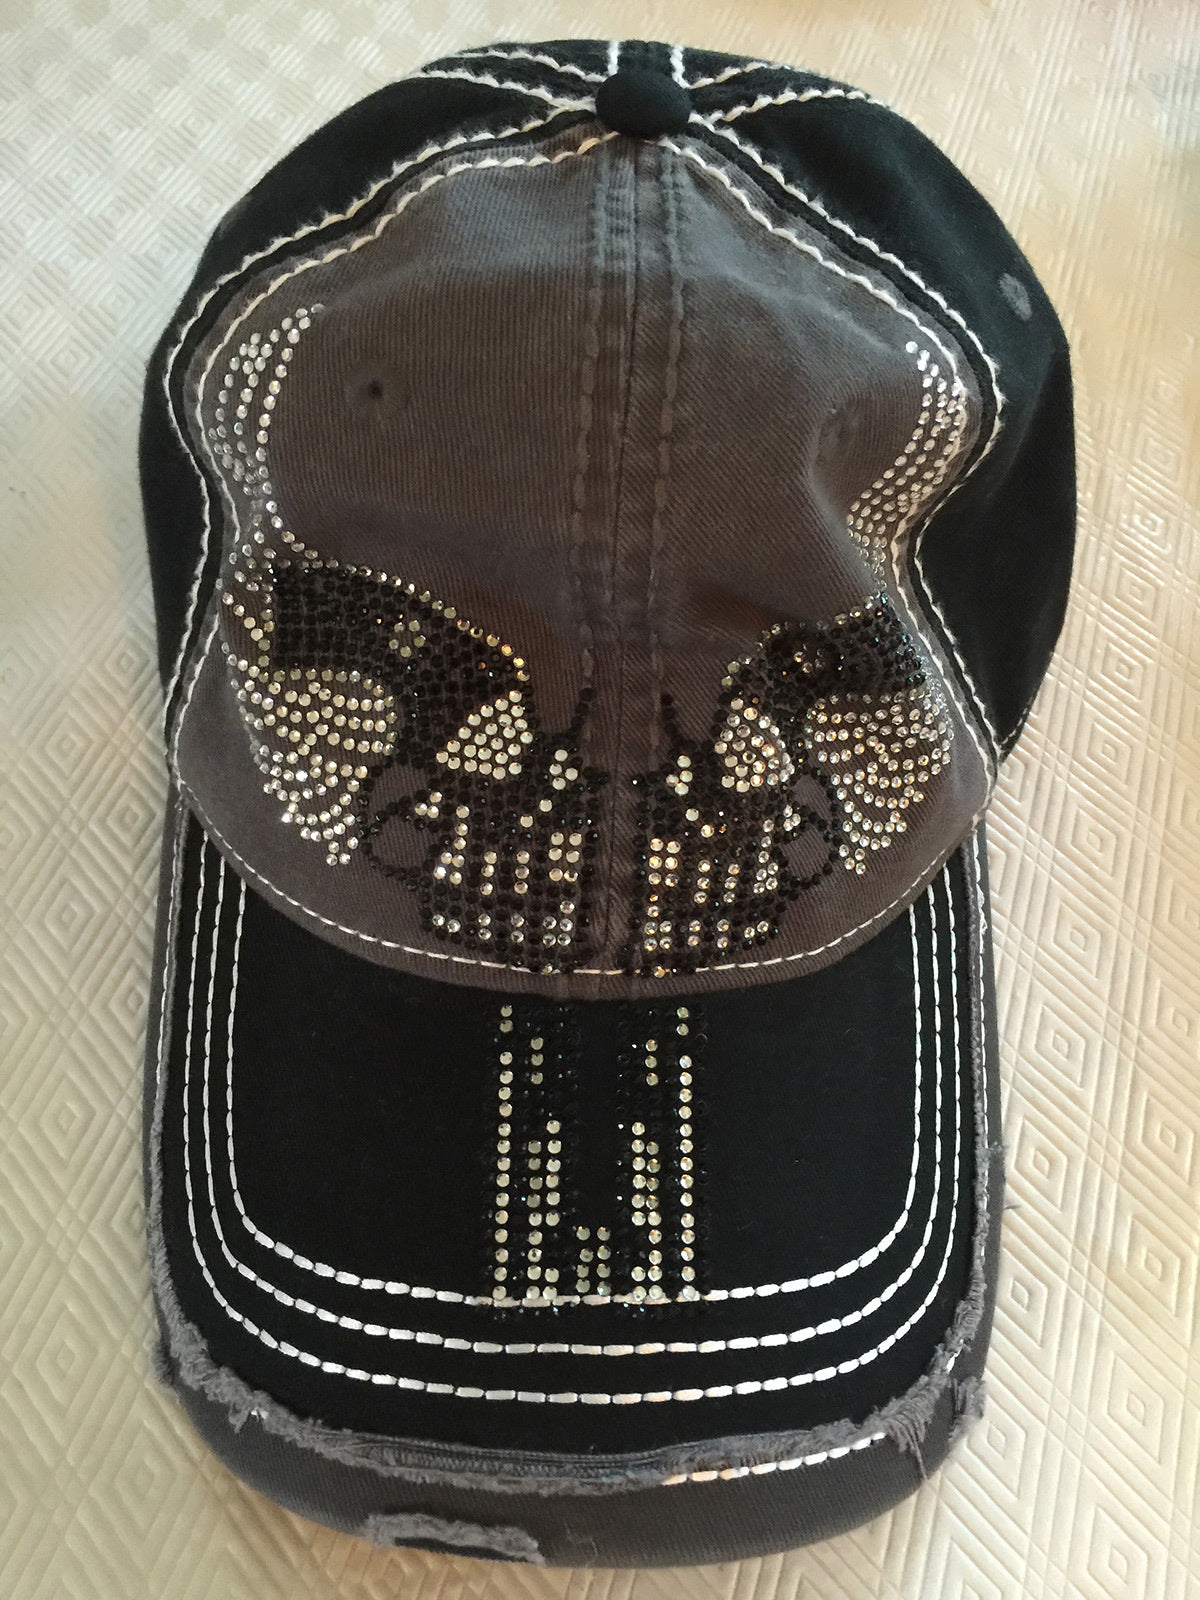 Guns on the Wings of Faith Low-Profile Cap